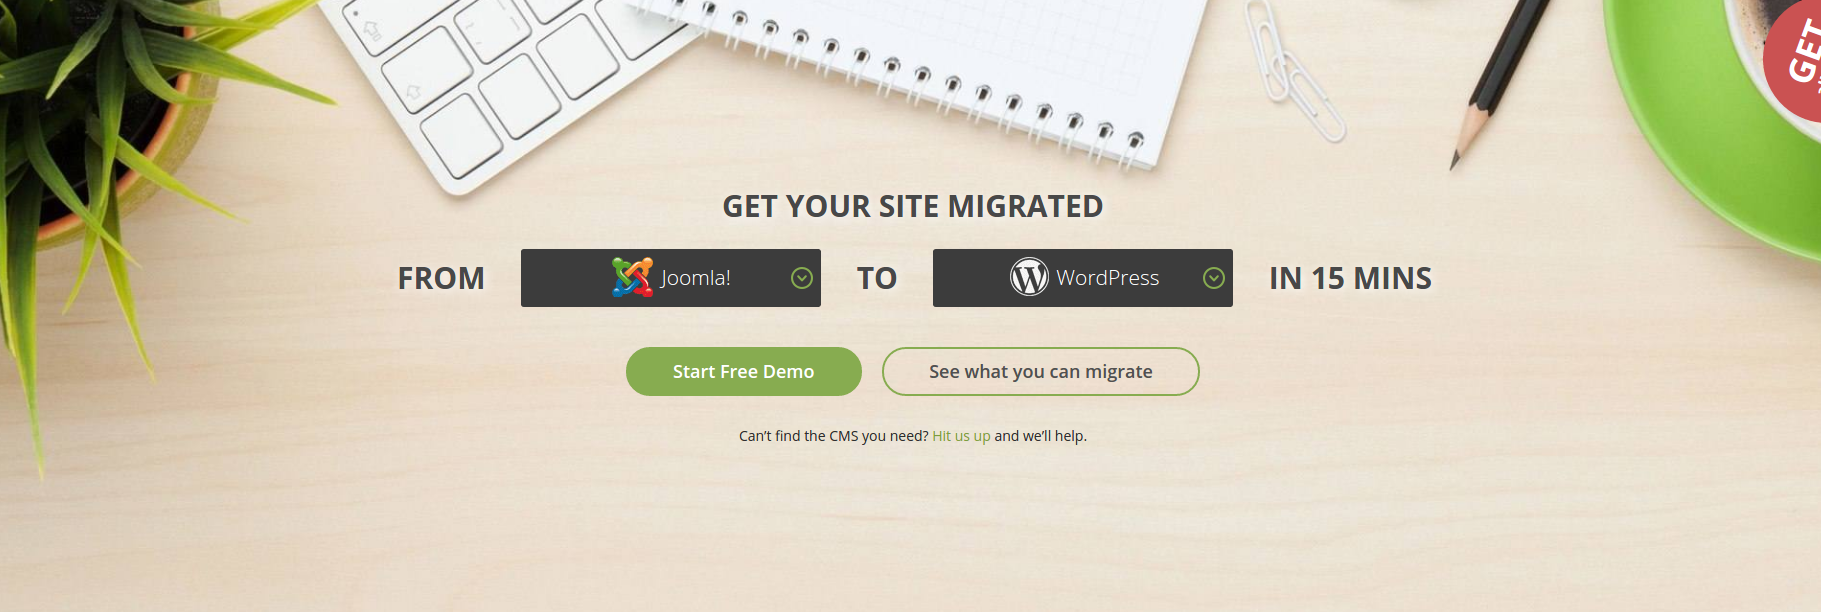 Start Free Demo Migration right away and check yourself how simple it is to move your site to WordPress with CMS2CMS.